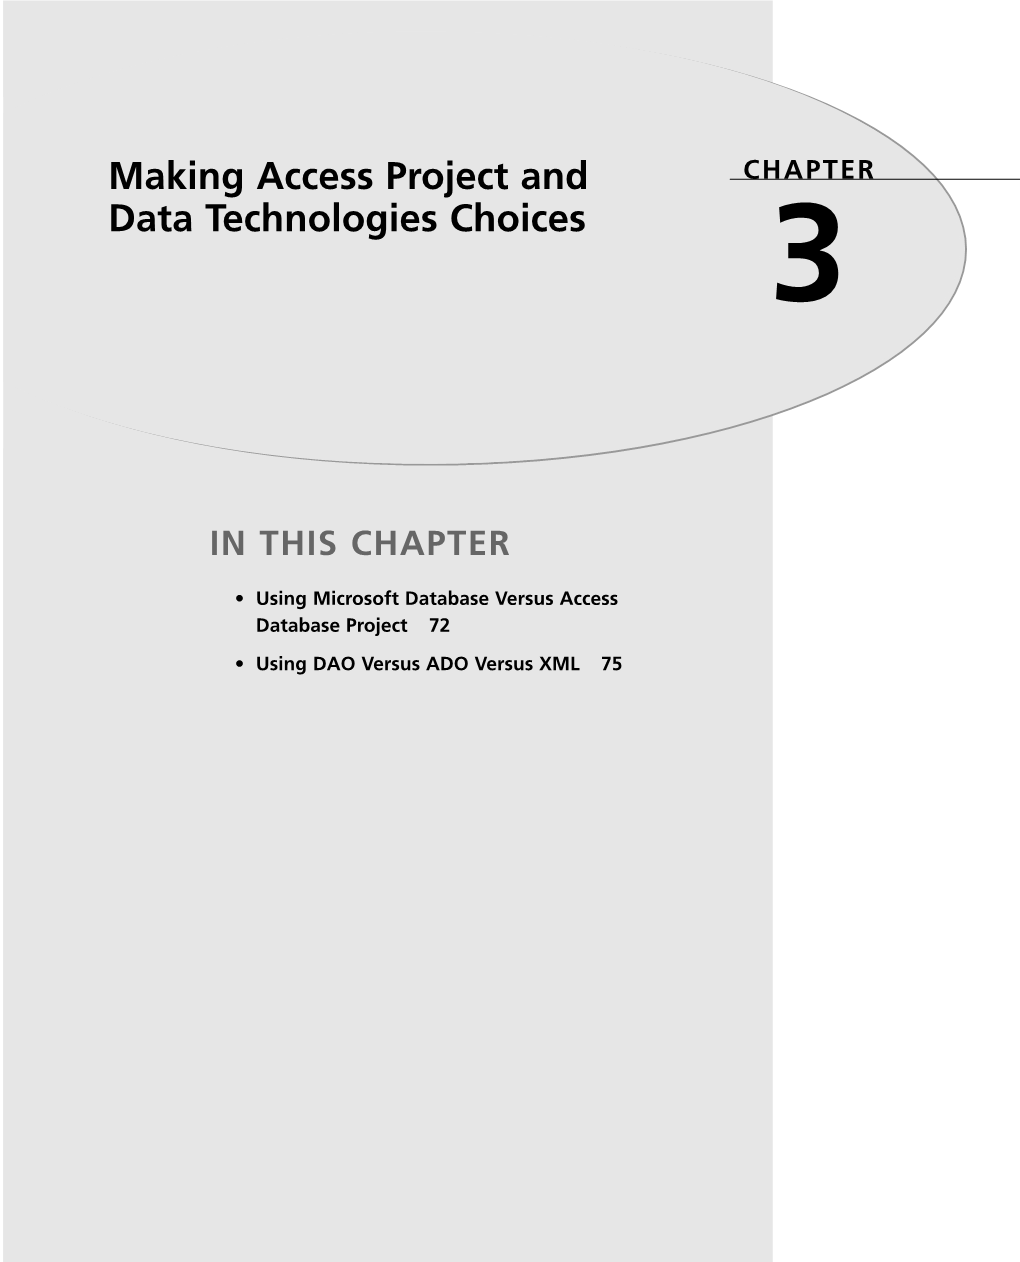 Making Access Project and Data Technologies Choices